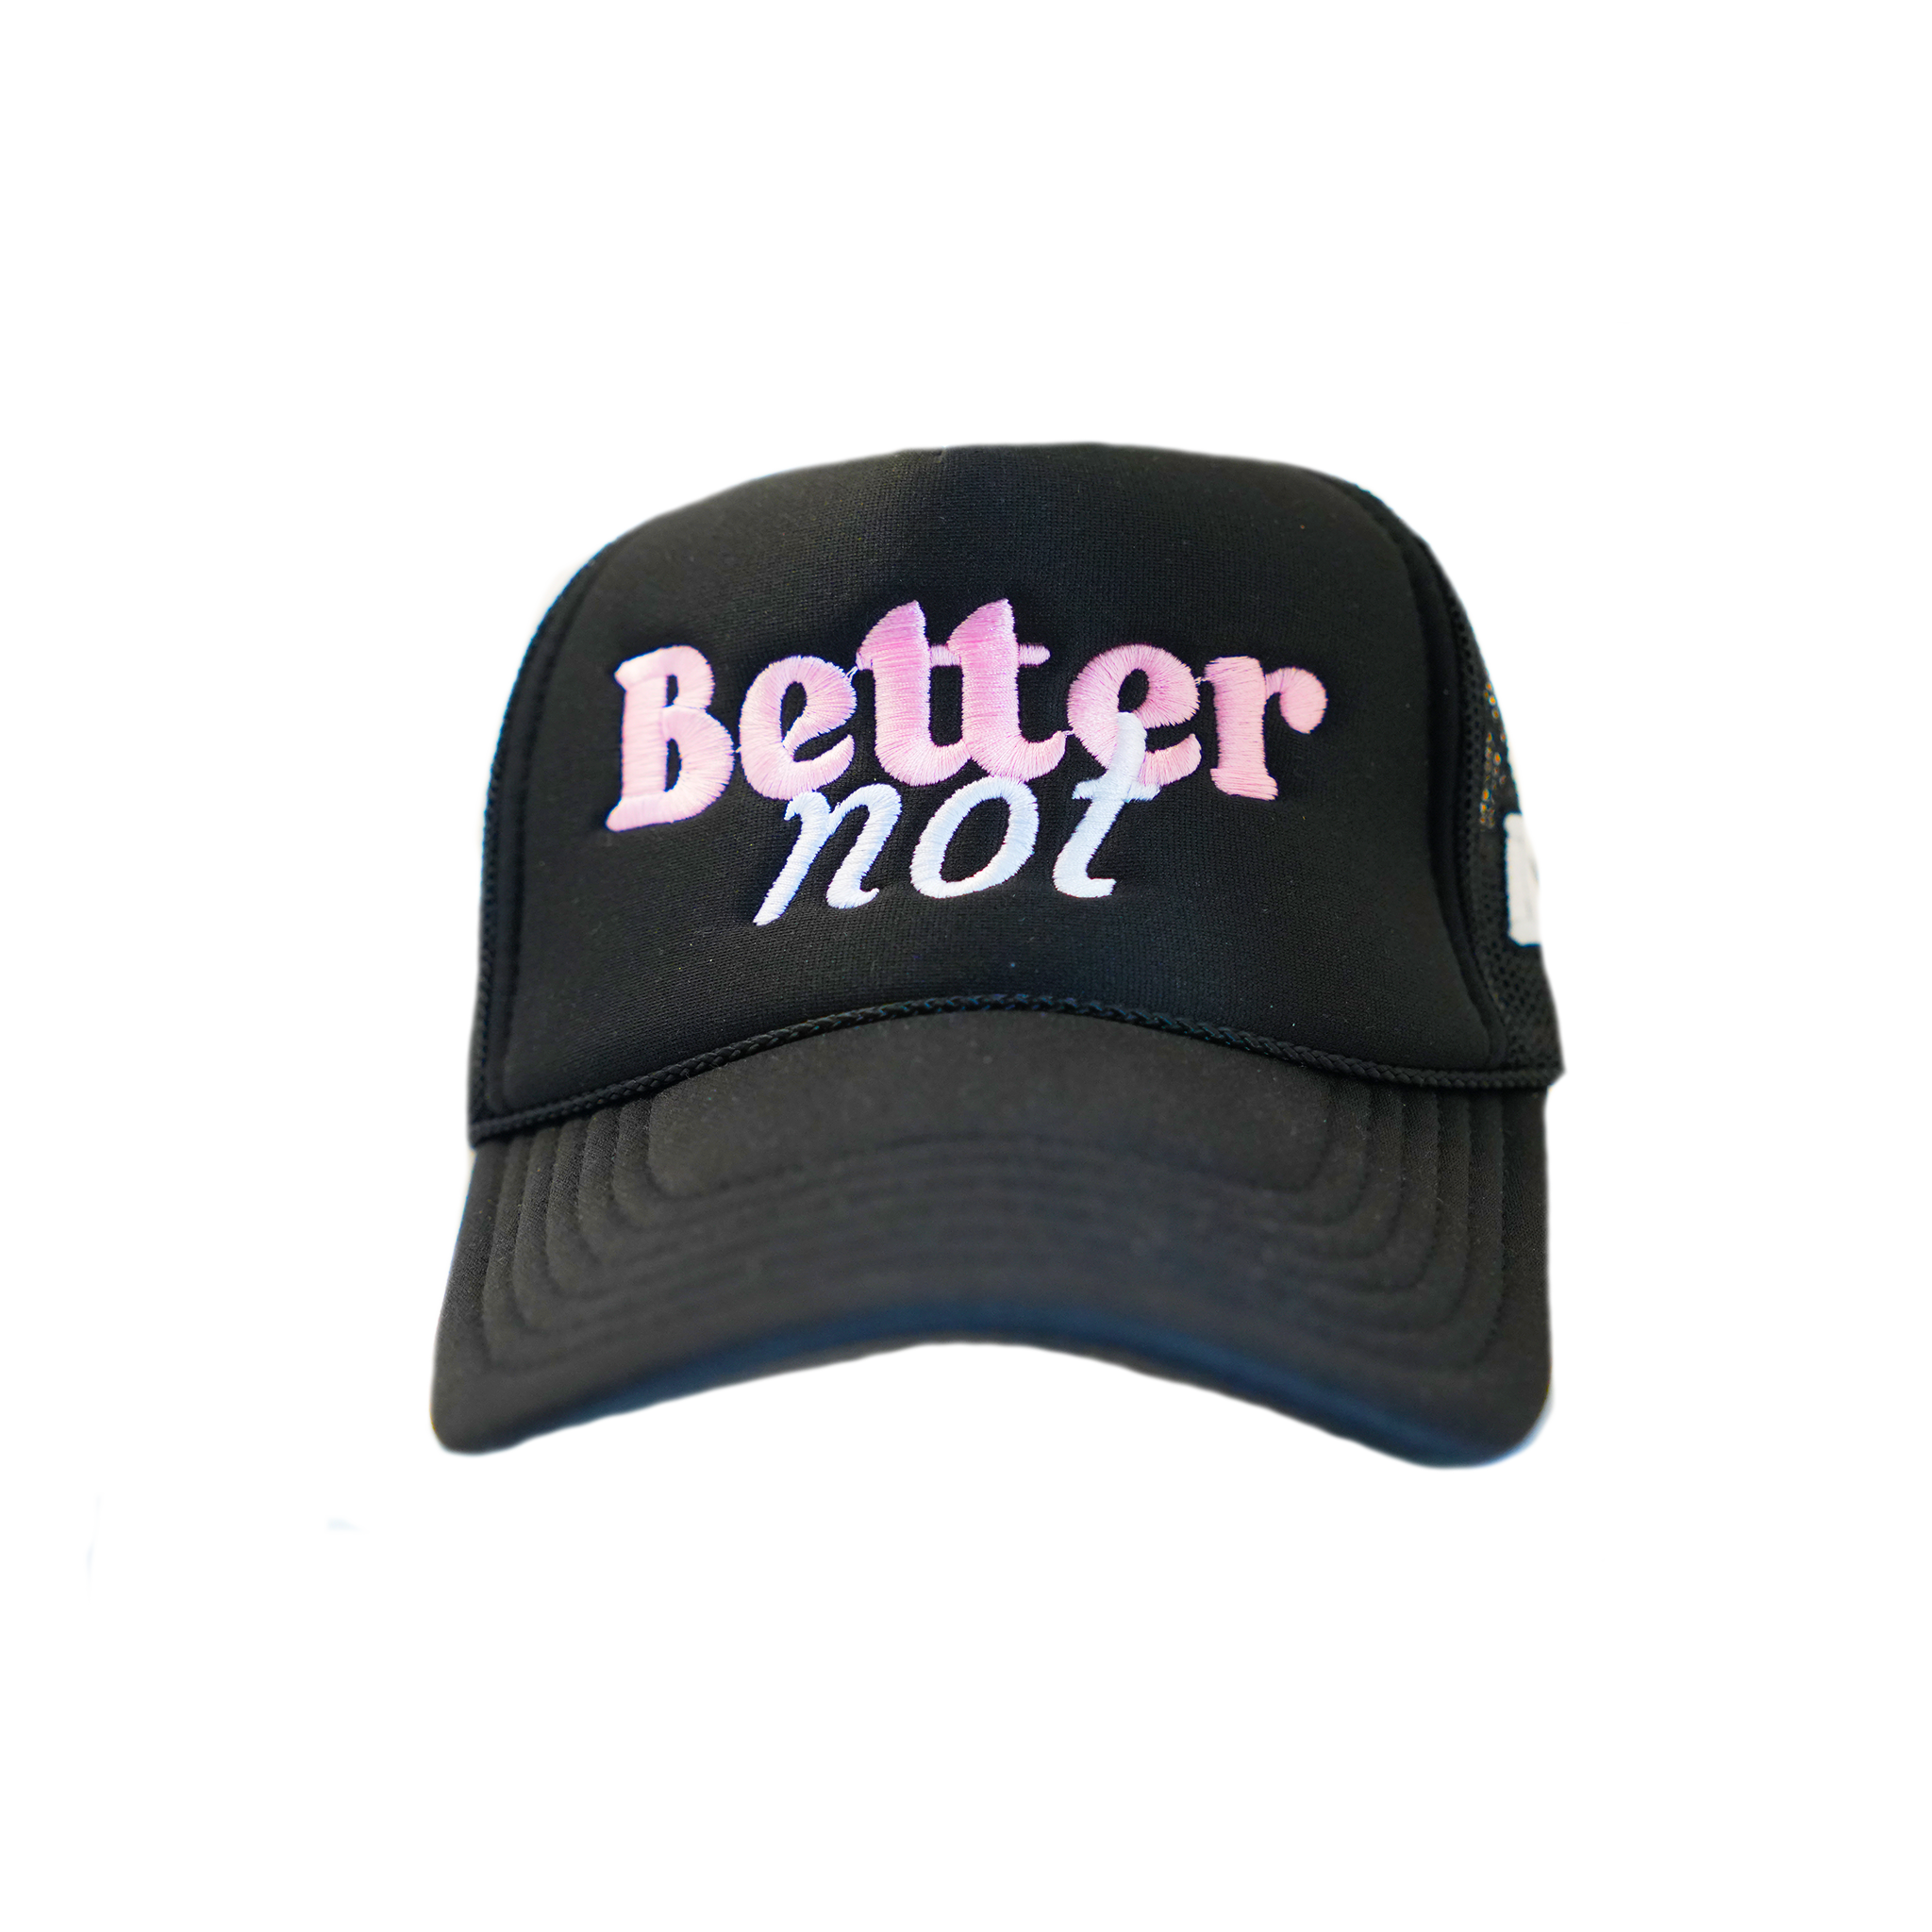 Classic Trucker (mid crown) black embroidered hat with the phrase "better not" in pink and white on the front, against a white background.